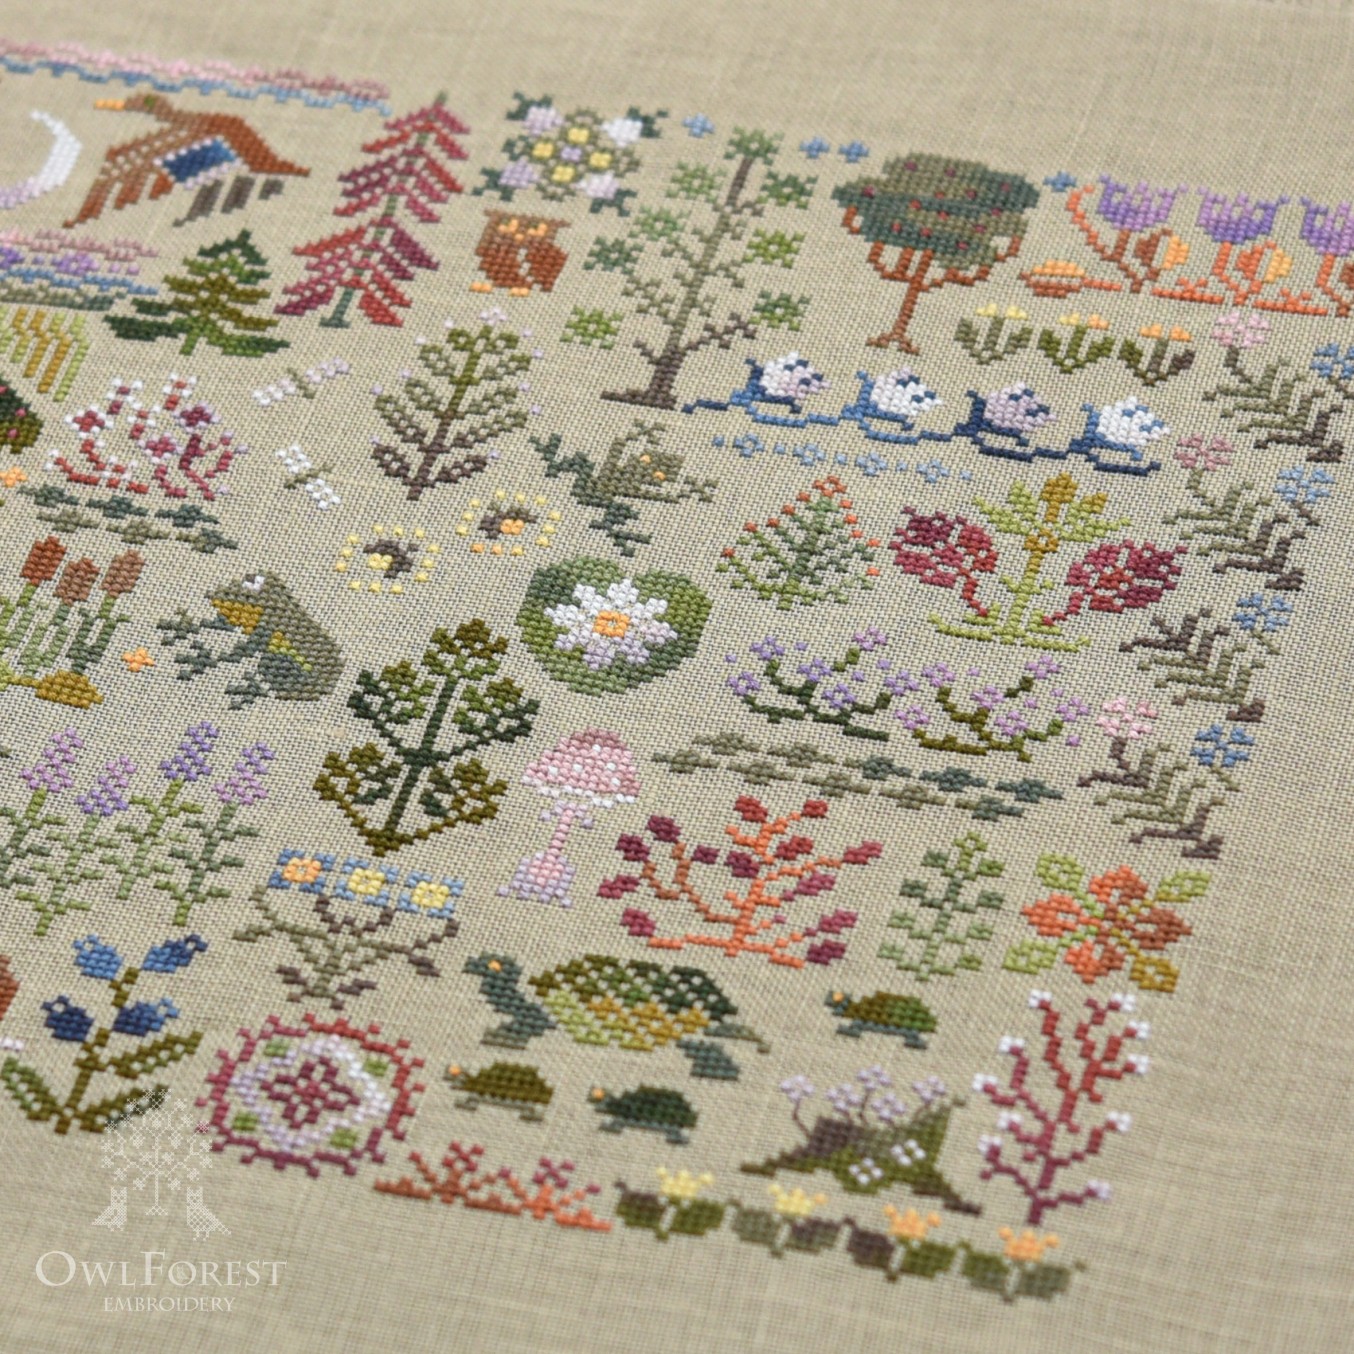 Embroidery kit “Bewitched Swamp” – Owlforest Embroidery